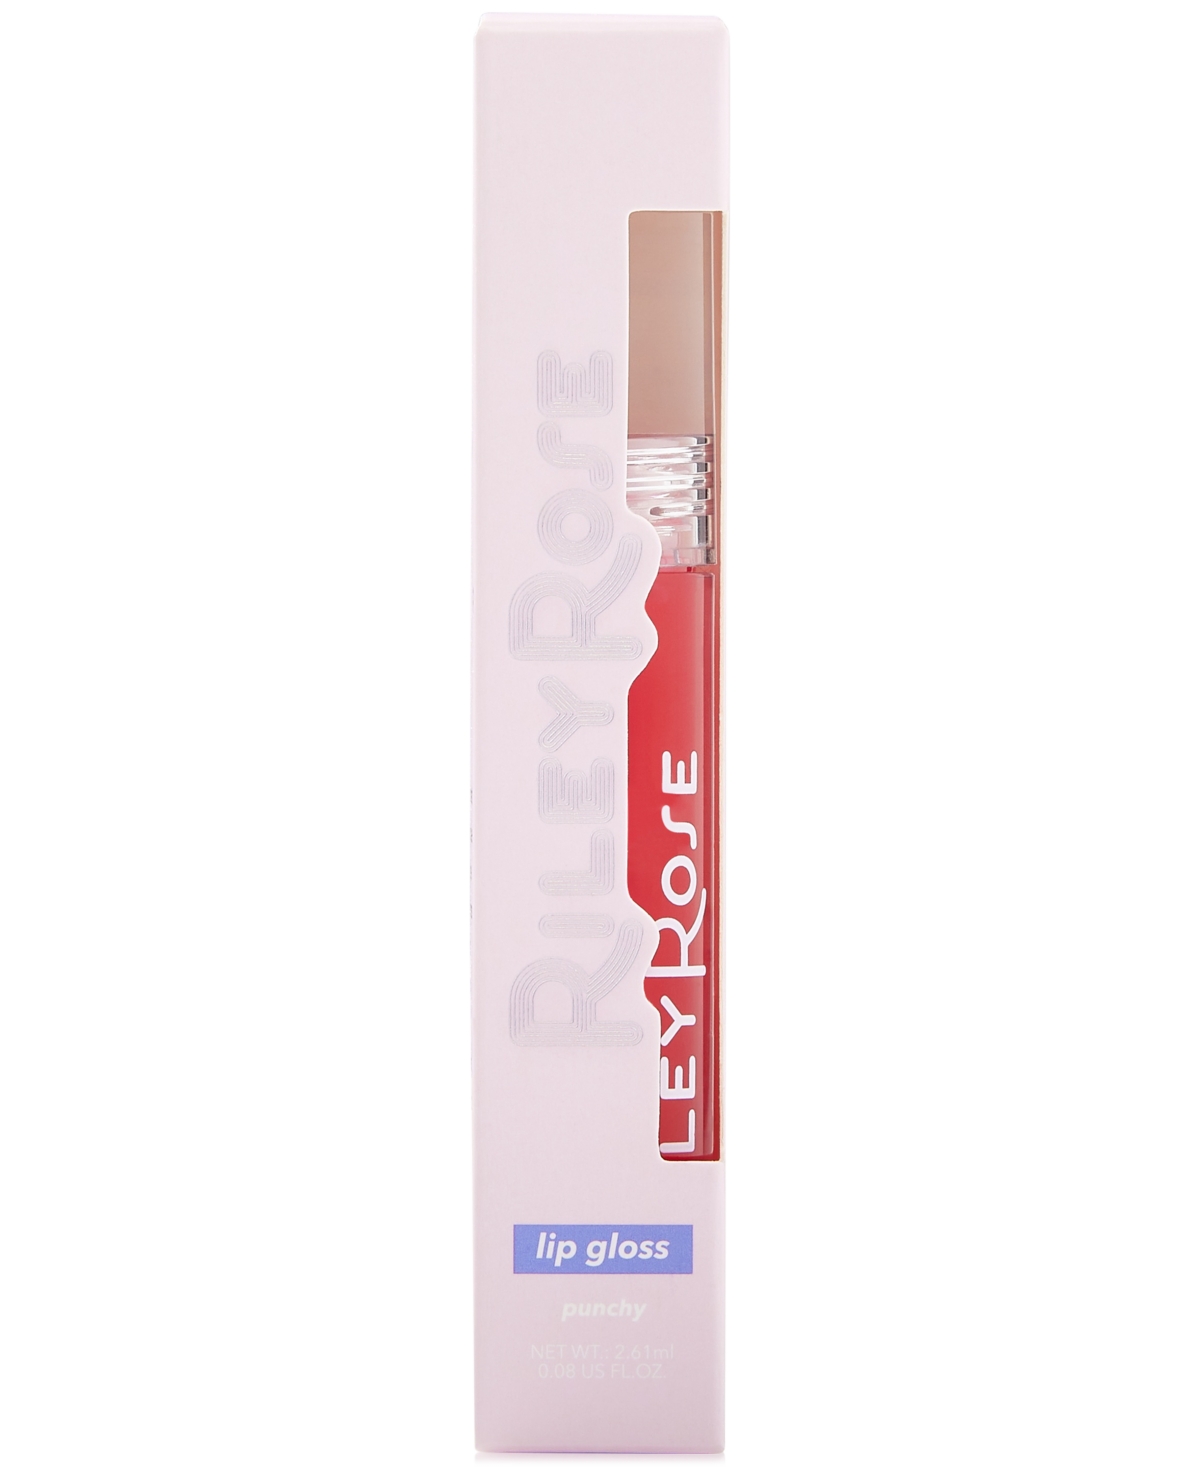 Riley Rose Lip Gloss In Punchy